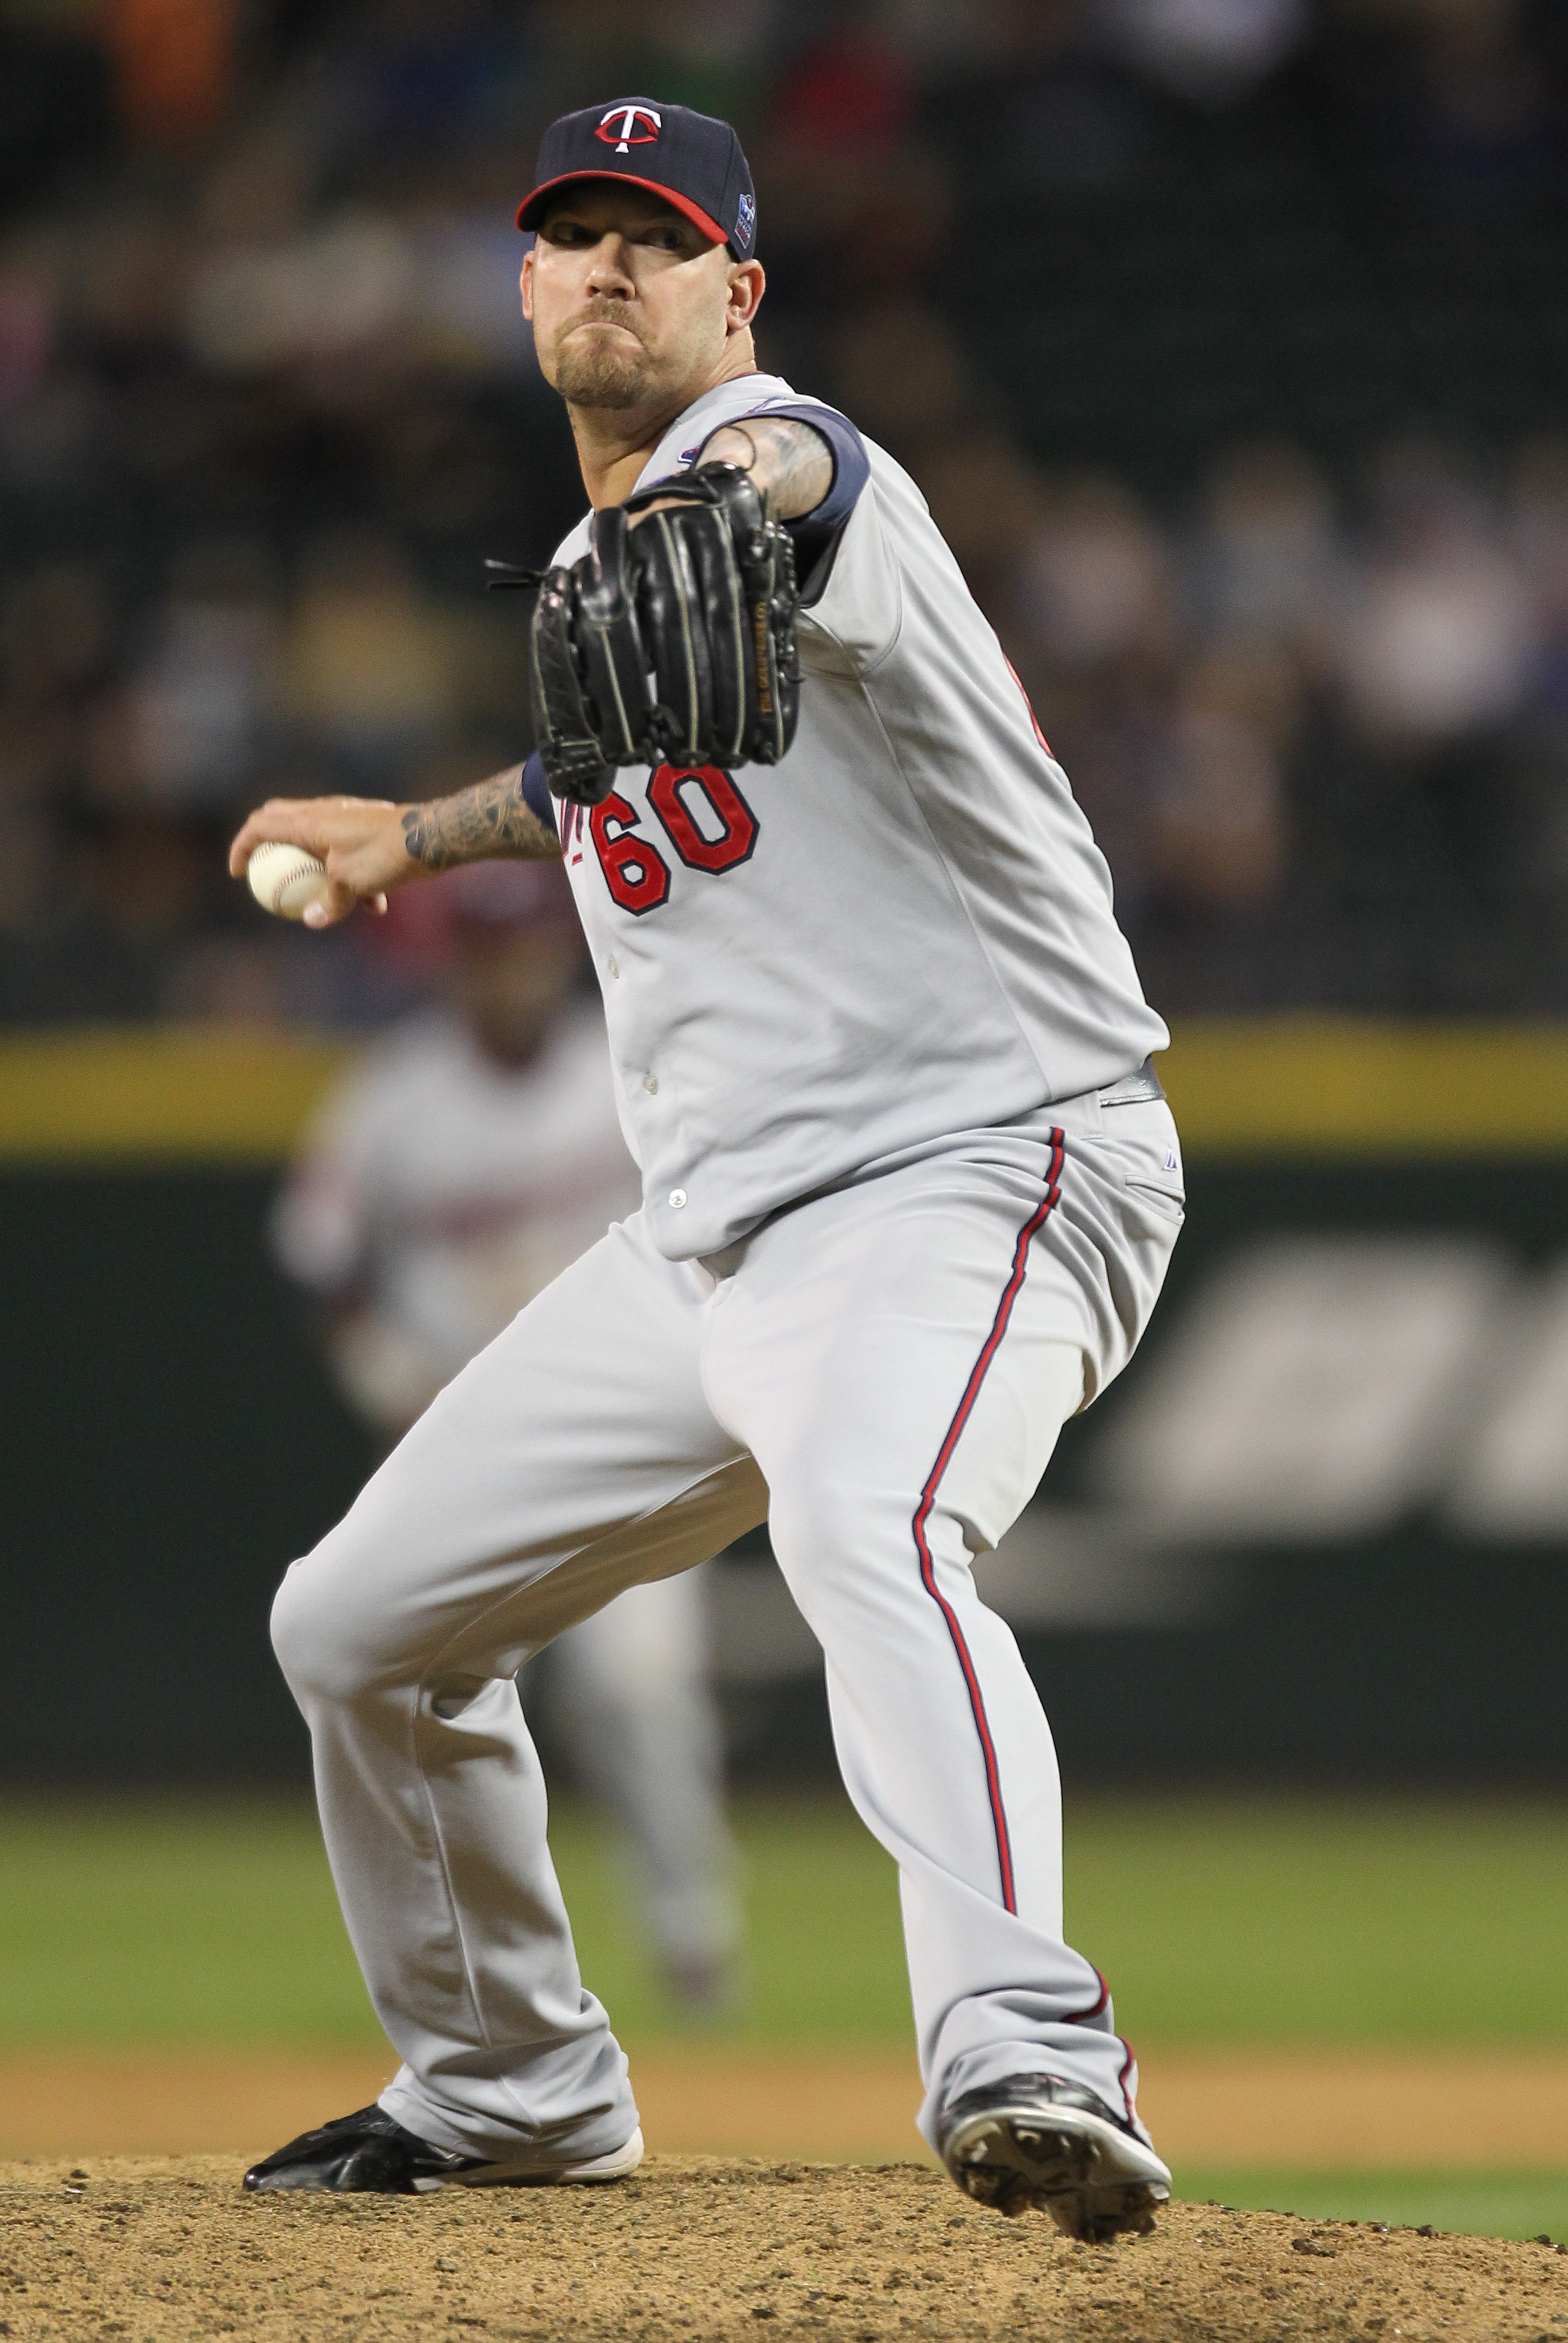 SEATTLE - AUGUST 27:  Relief pitcher Jon Rauch #60 of the Minnesota Twins pitches against the Seattle Mariners at Safeco Field on August 27, 2010 in Seattle, Washington. The Twins won 6-3. (Photo by Otto Greule Jr/Getty Images)